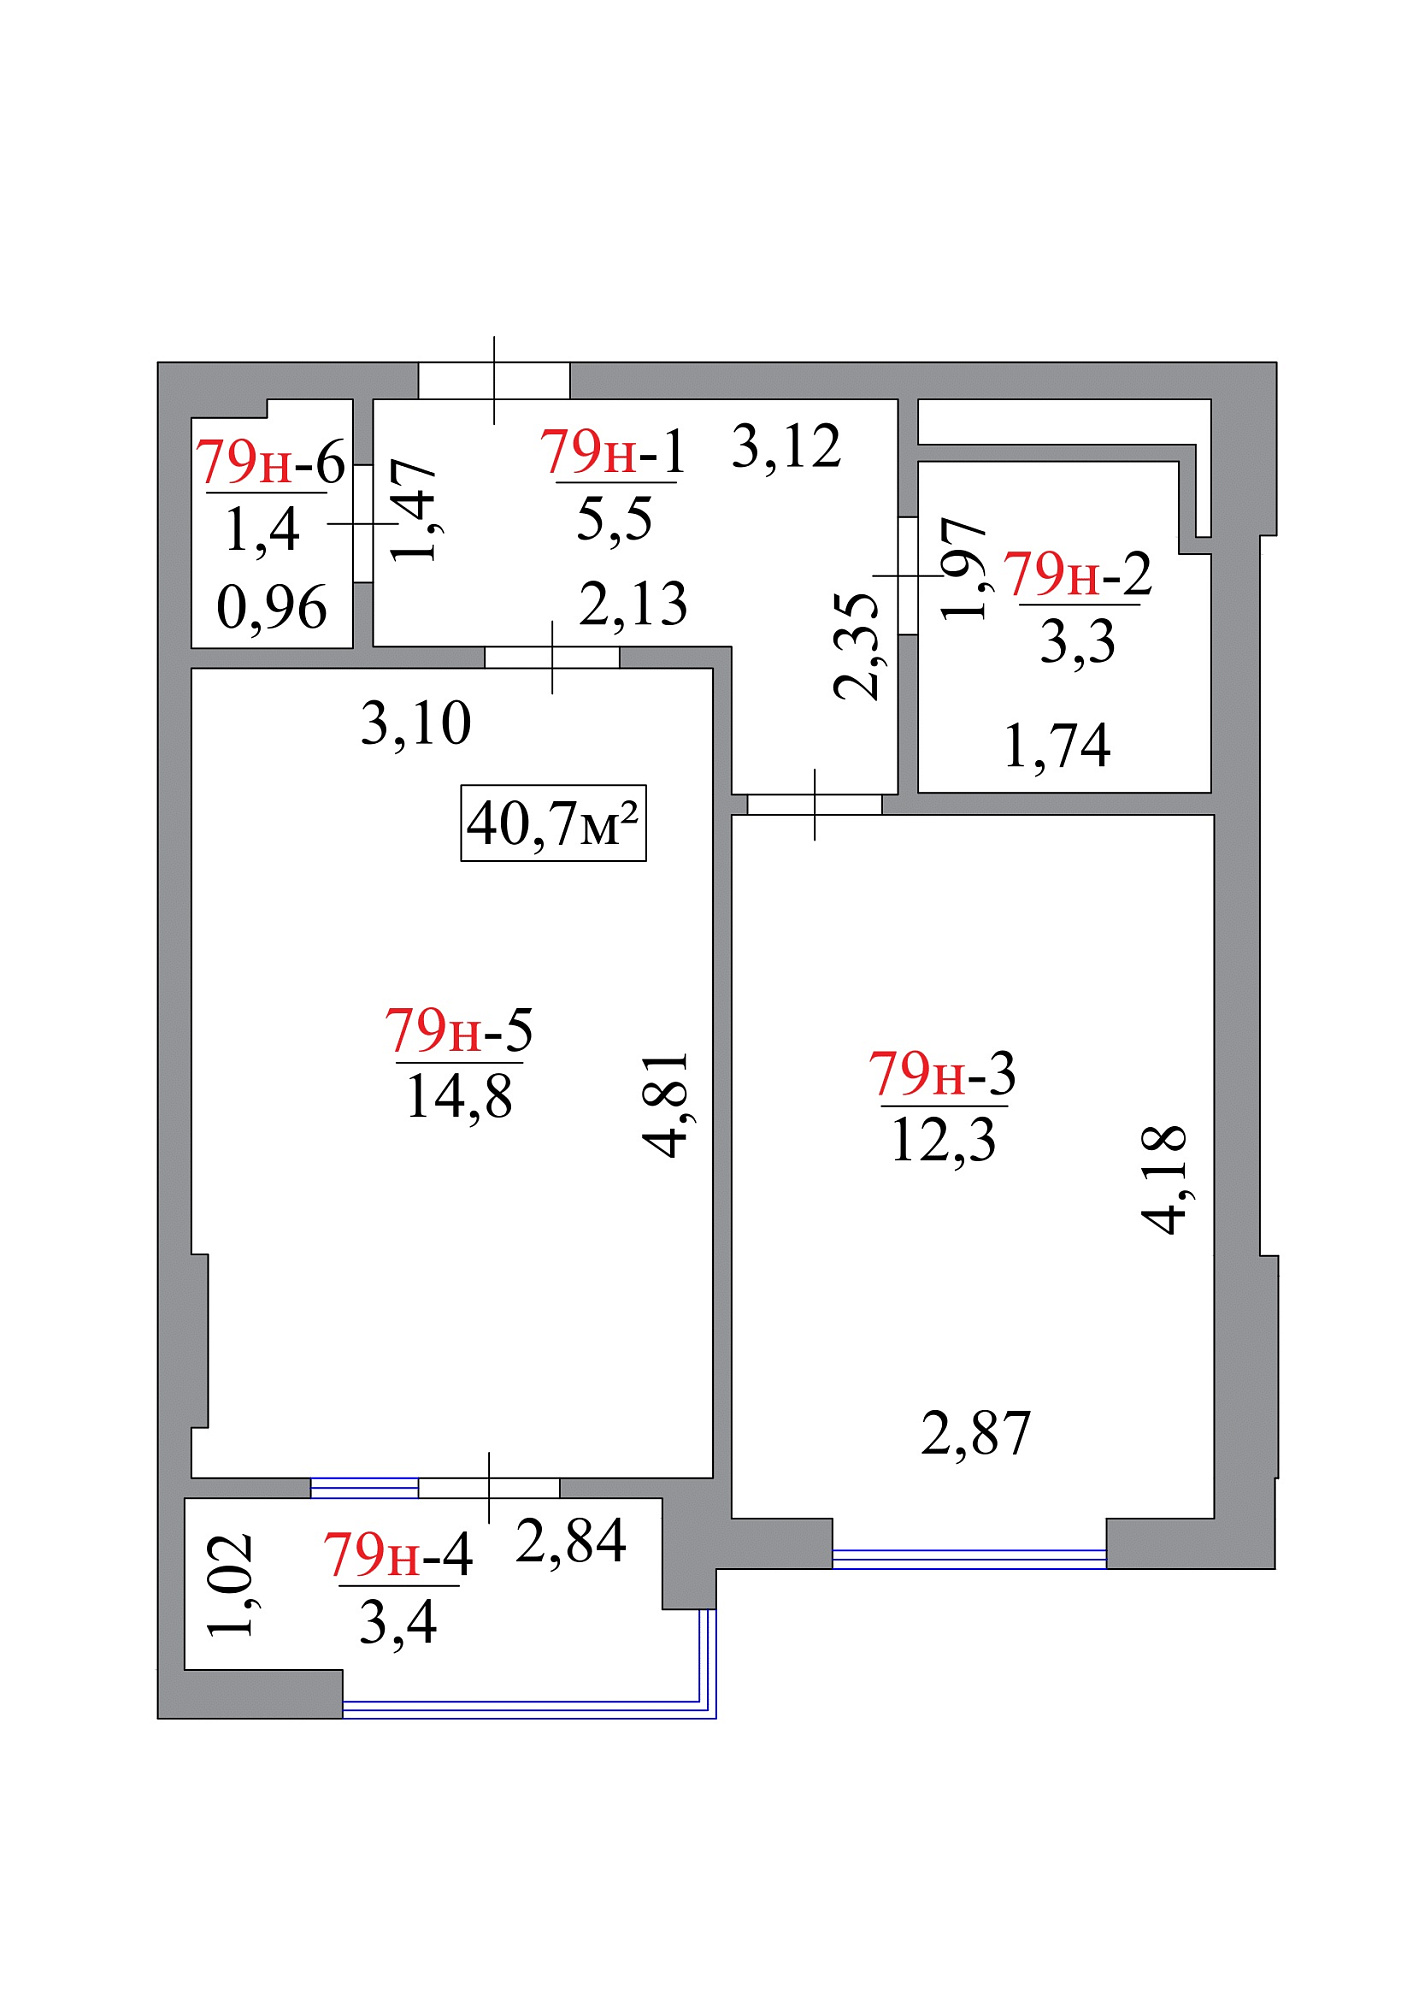 Planning 1-rm flats area 40.7m2, AB-07-08/00071.